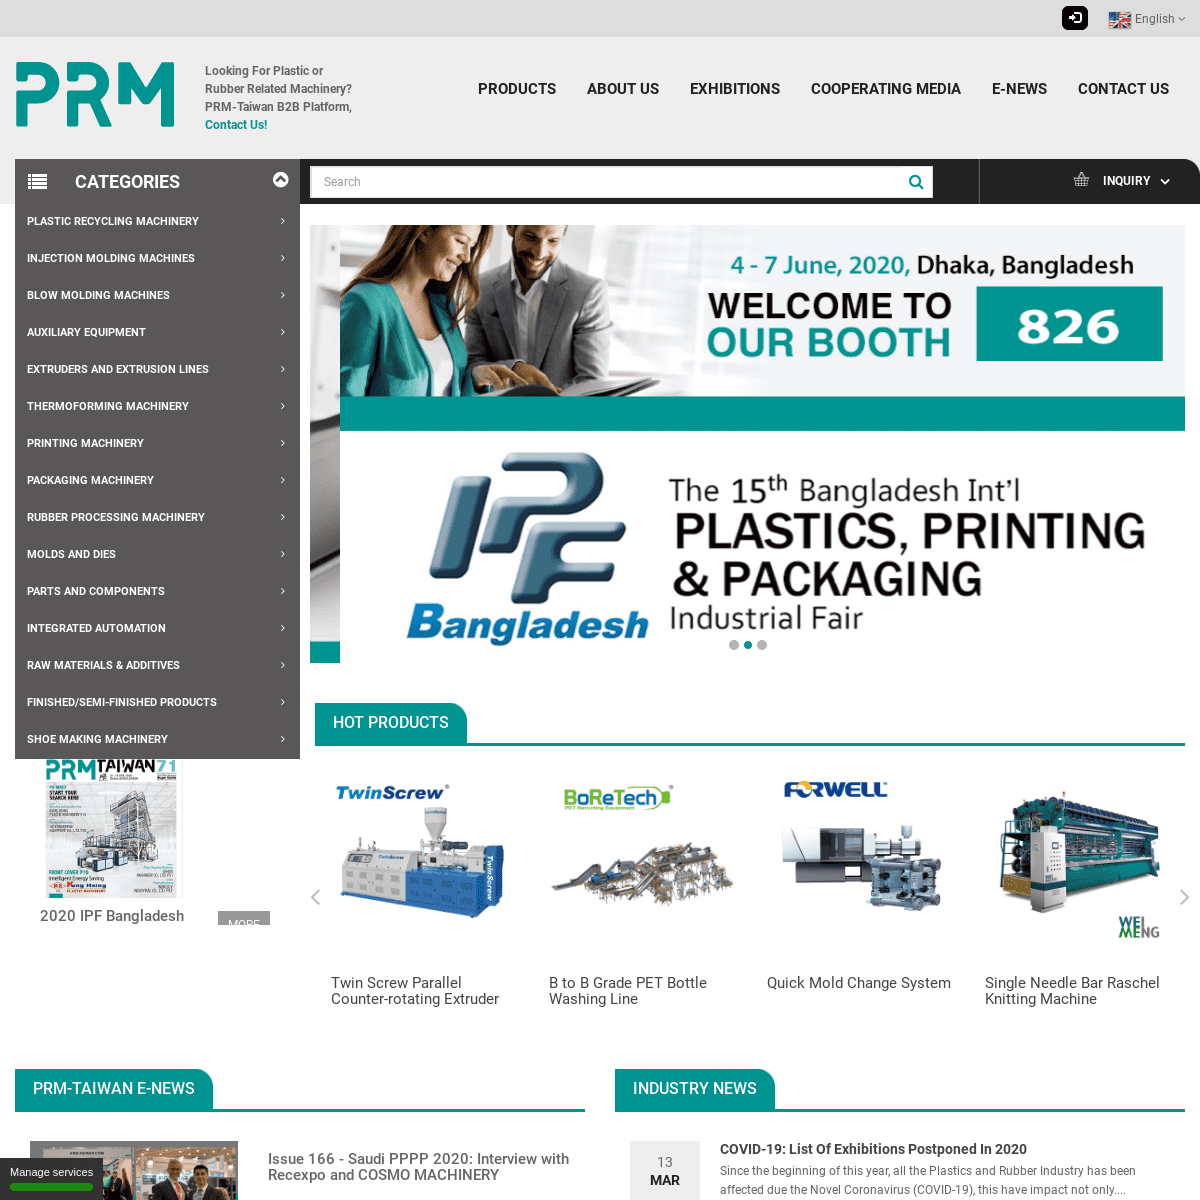 A complete backup of prm-taiwan.com